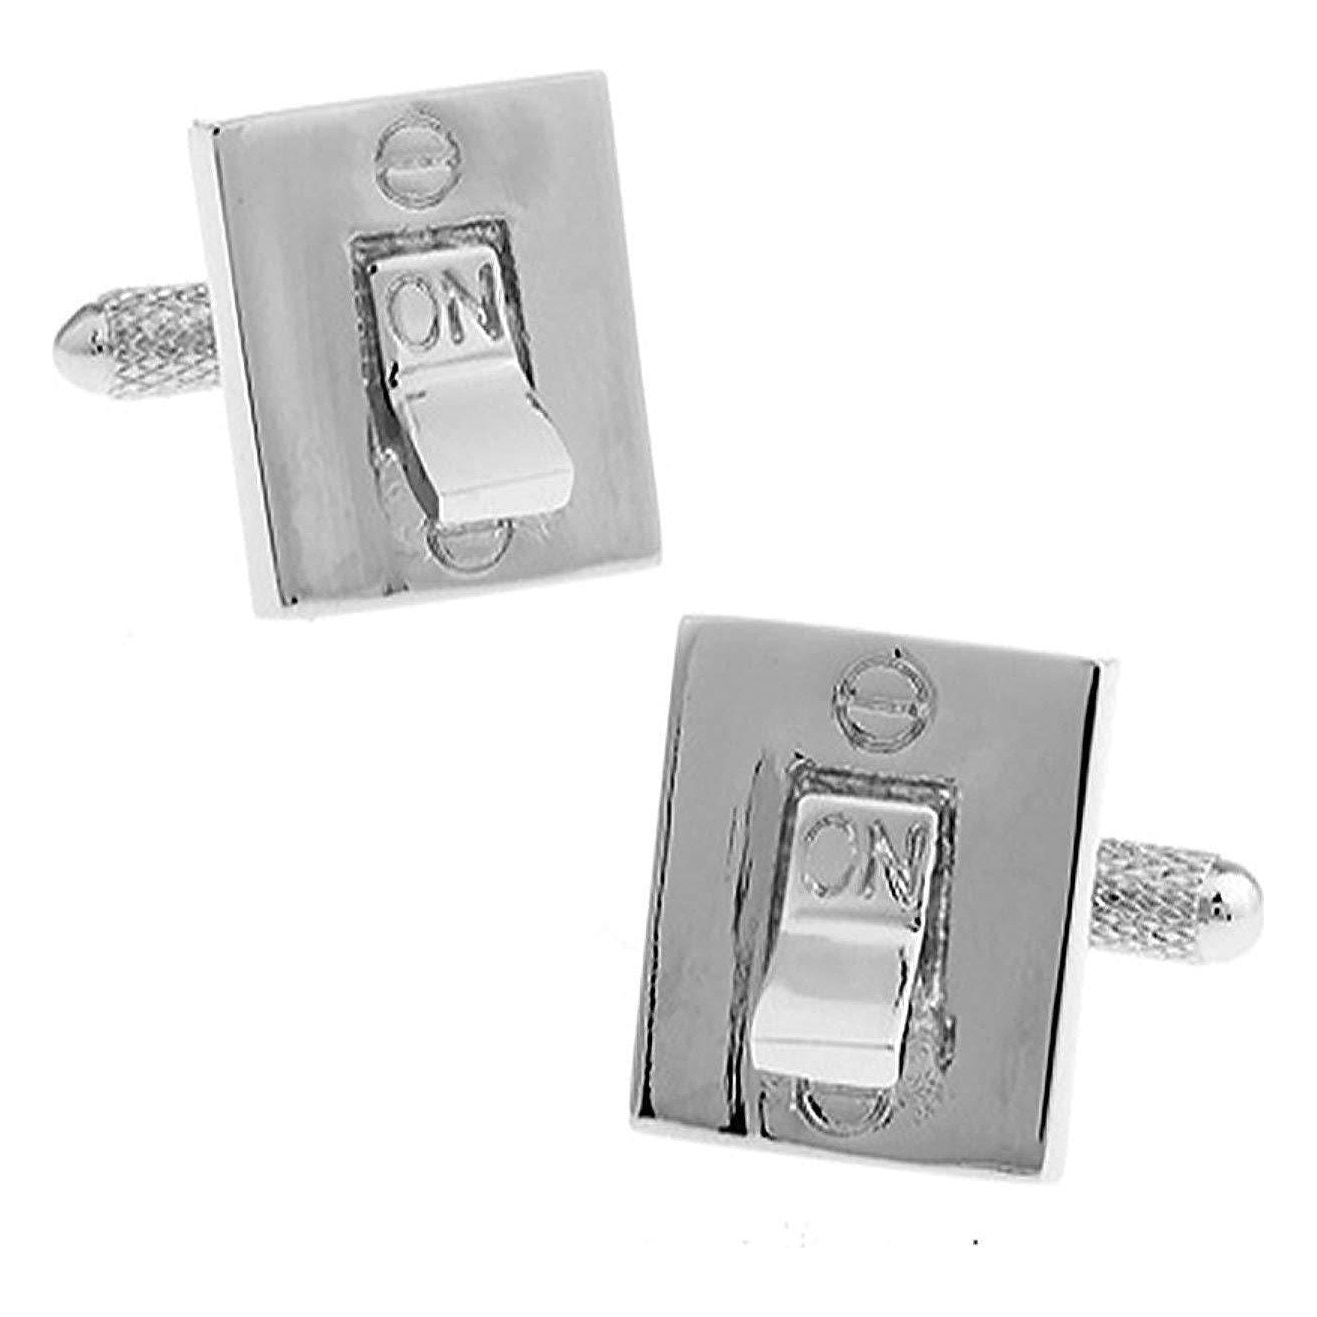 On/Off Switch Cufflinks - Ashton and Finch